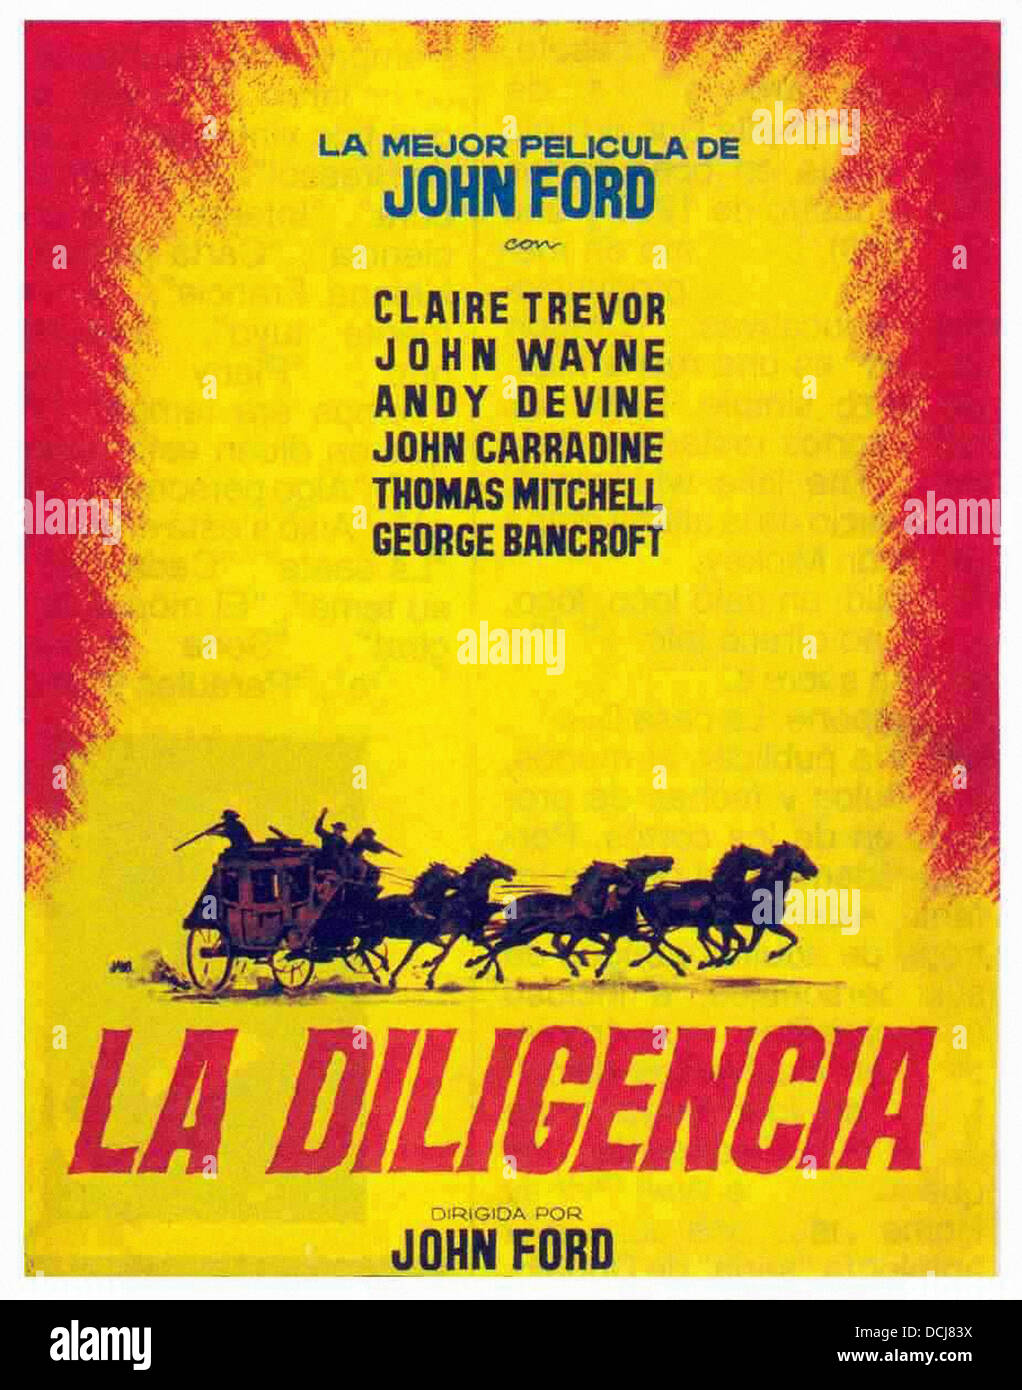 STAGECOACH - Spanish movie poster - Directed by John Ford - United Artists 1939 Stock Photo